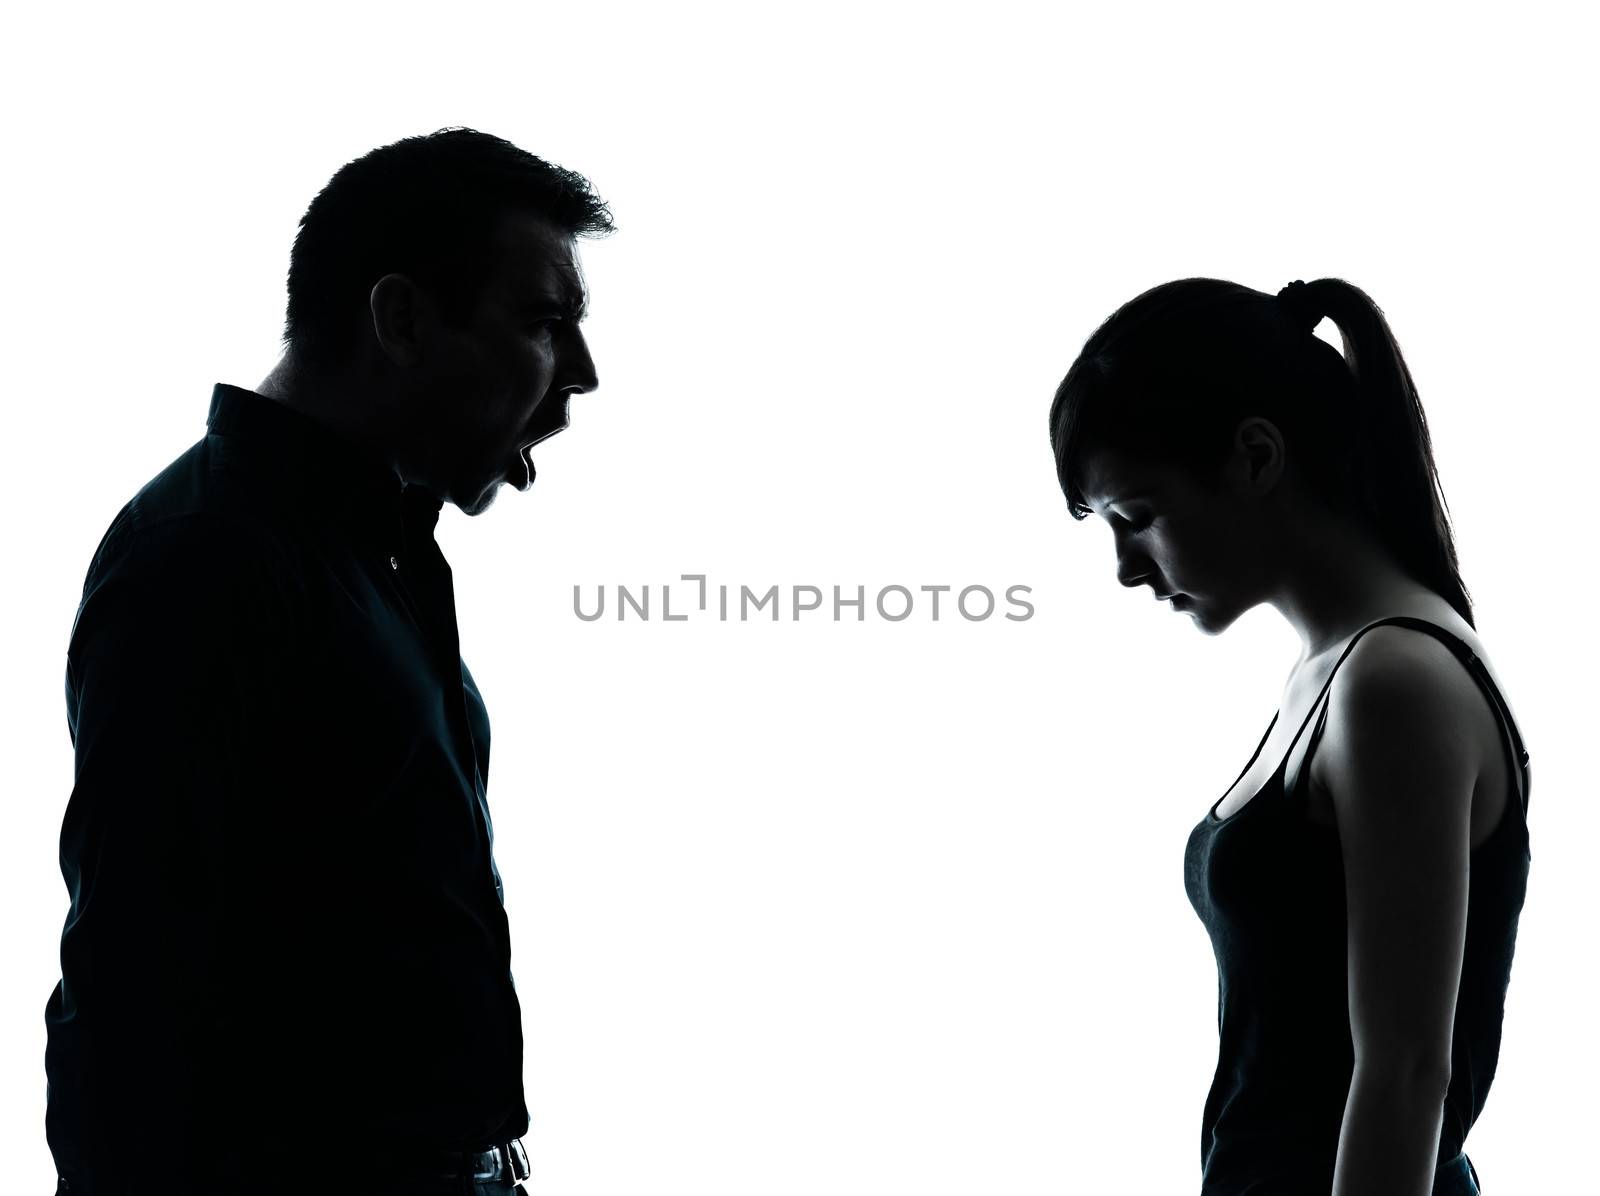 one man and teenager girl dispute conflict in silhouette indoors isolated on white background